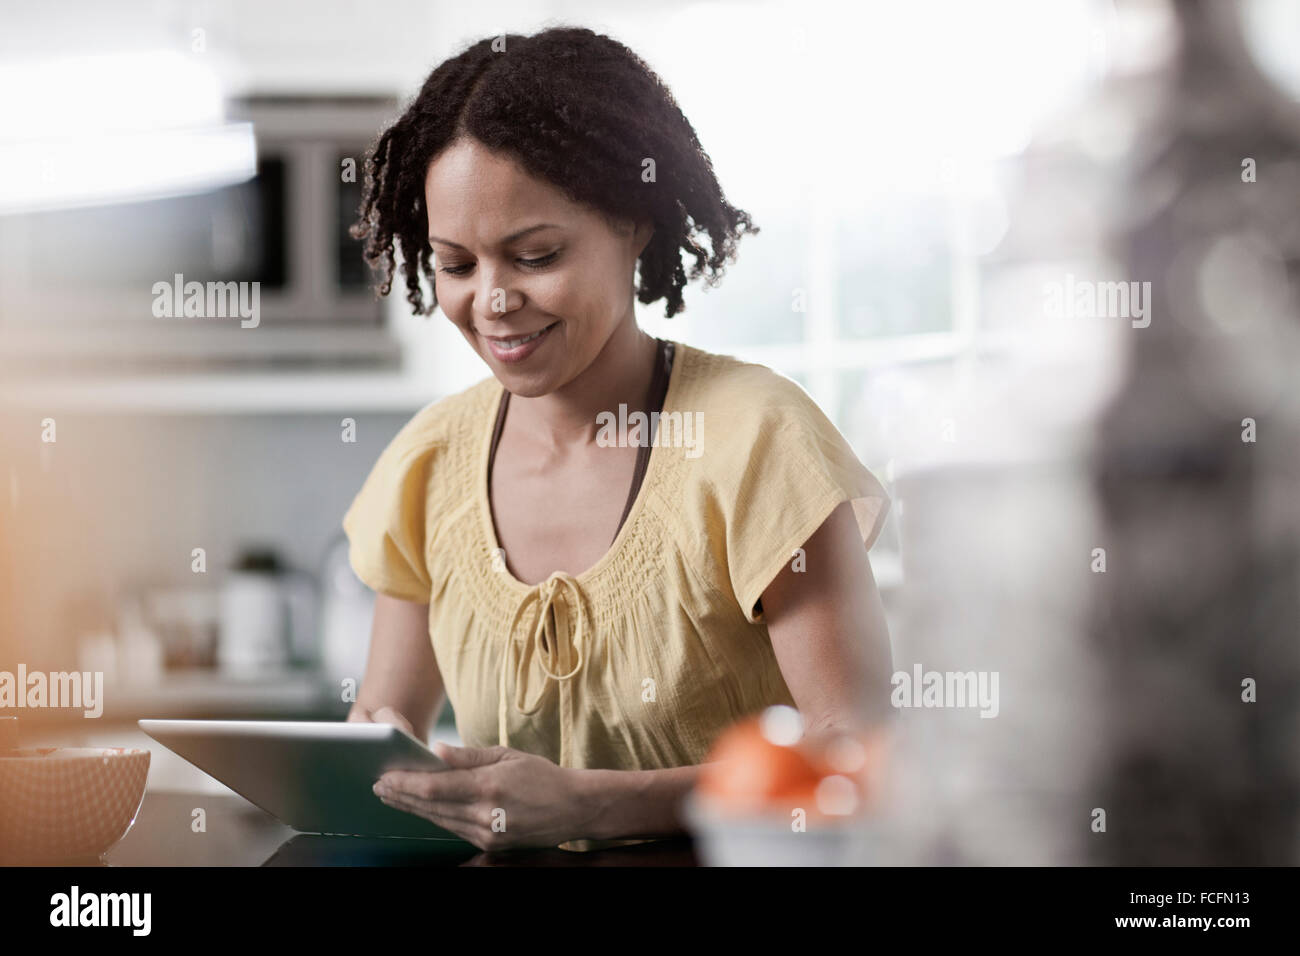 A woman using a digital tablet in her home. Standing in the kitchen. Stock Photo